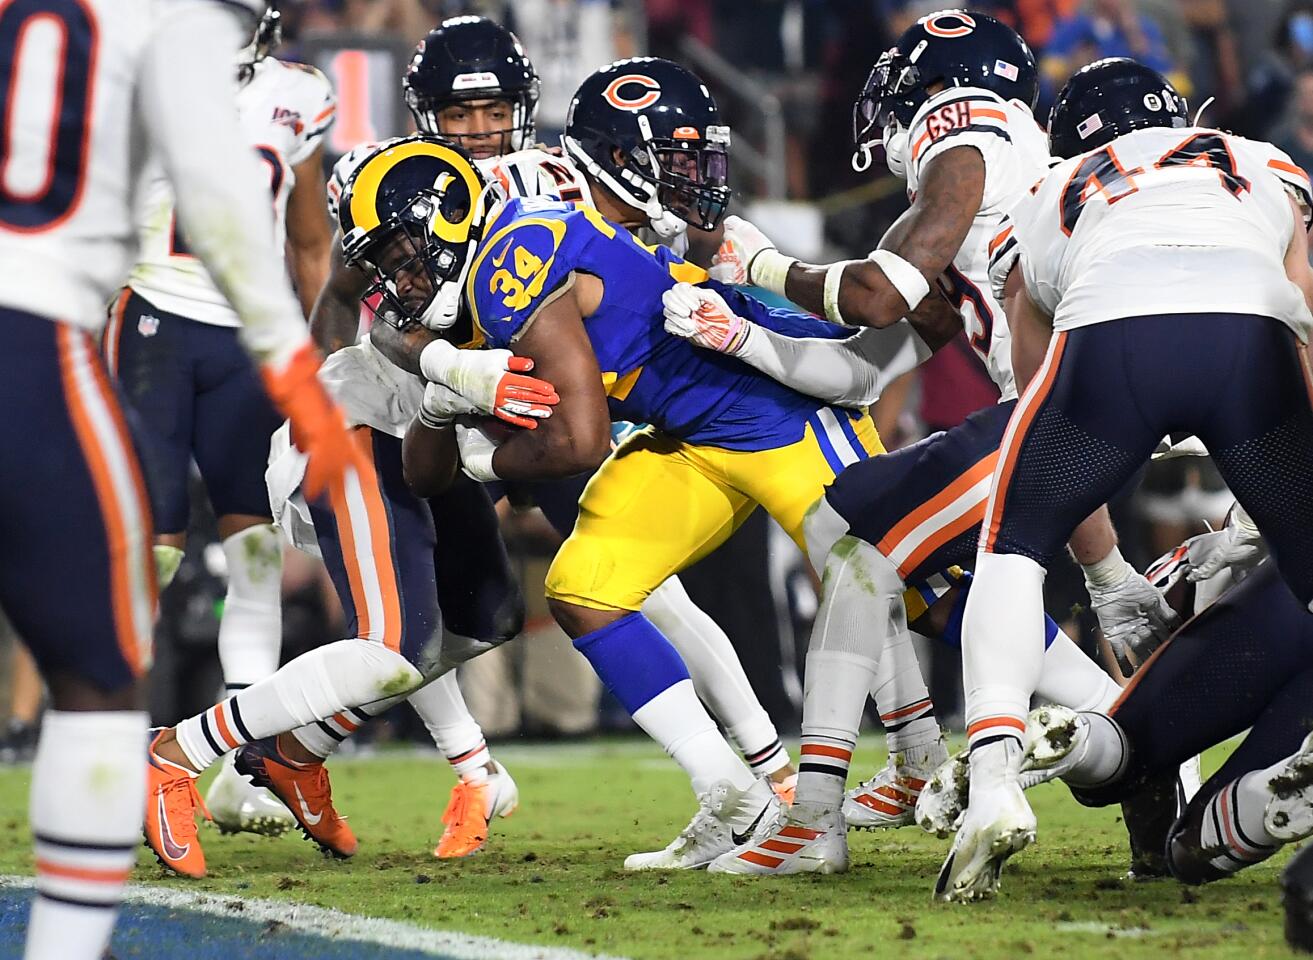 Rams running back Malcolm Brown scores a touchdown.